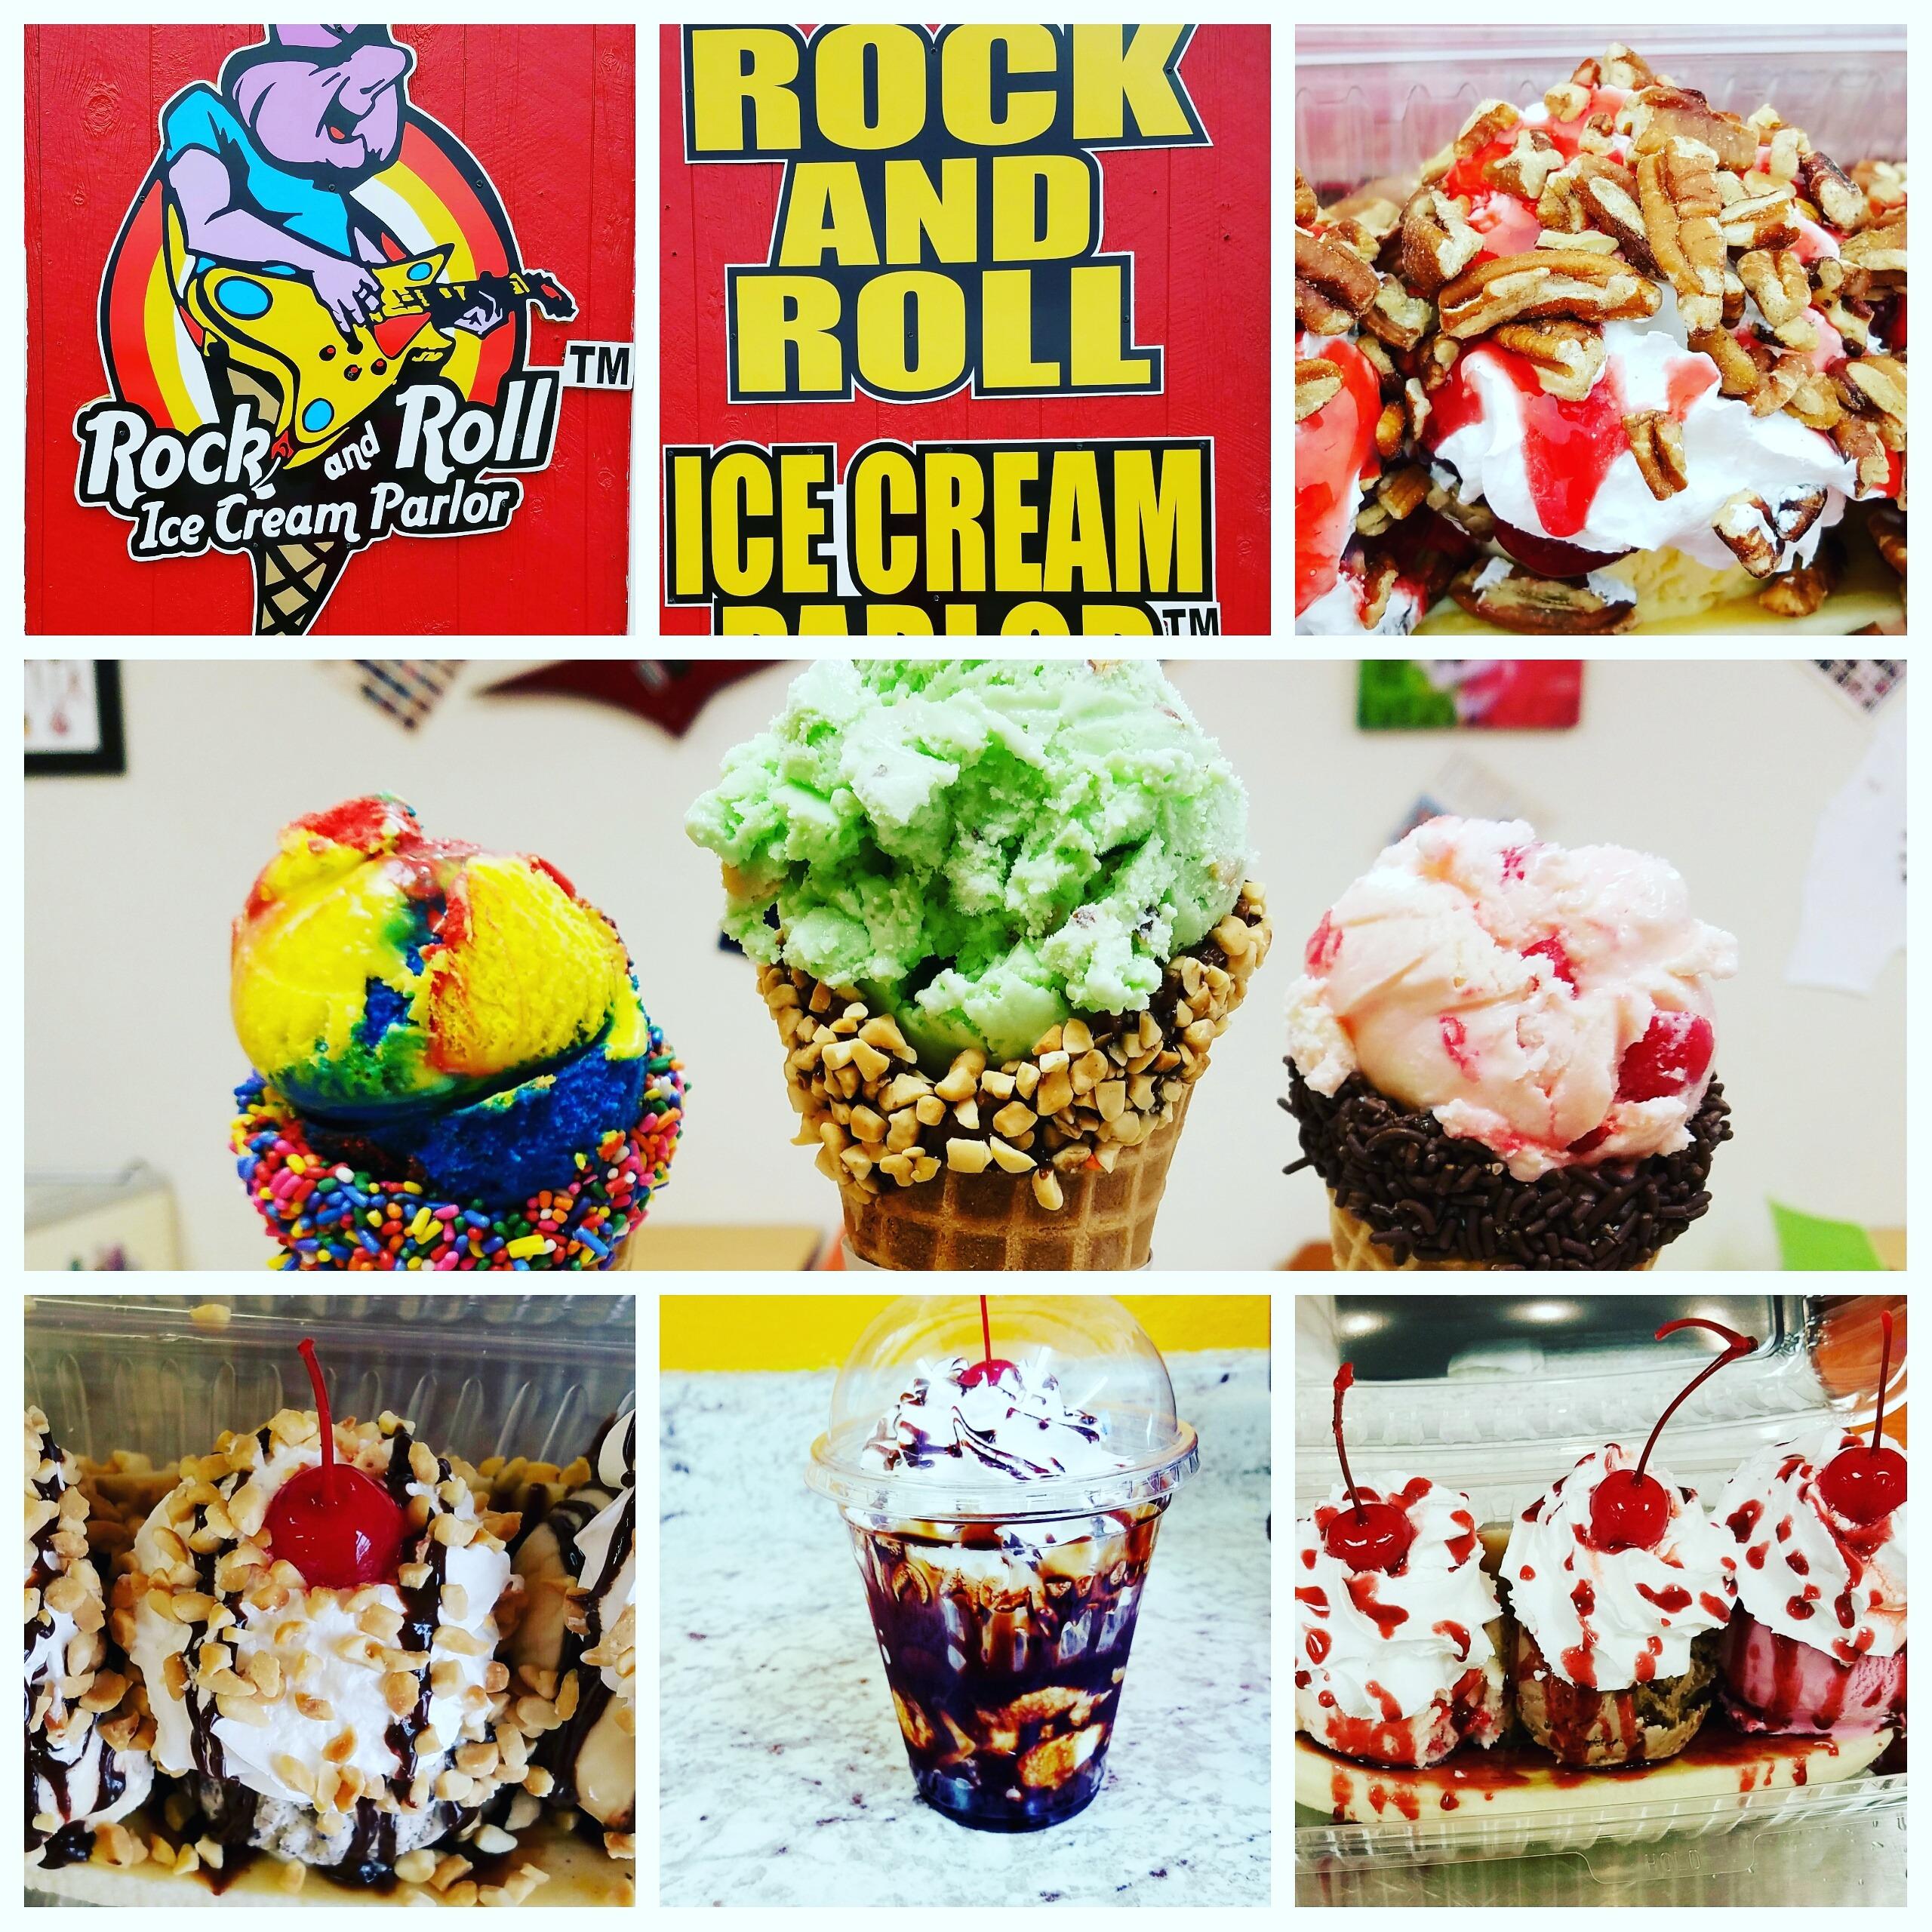 Rock And Roll Ice Cream Parlor Photo